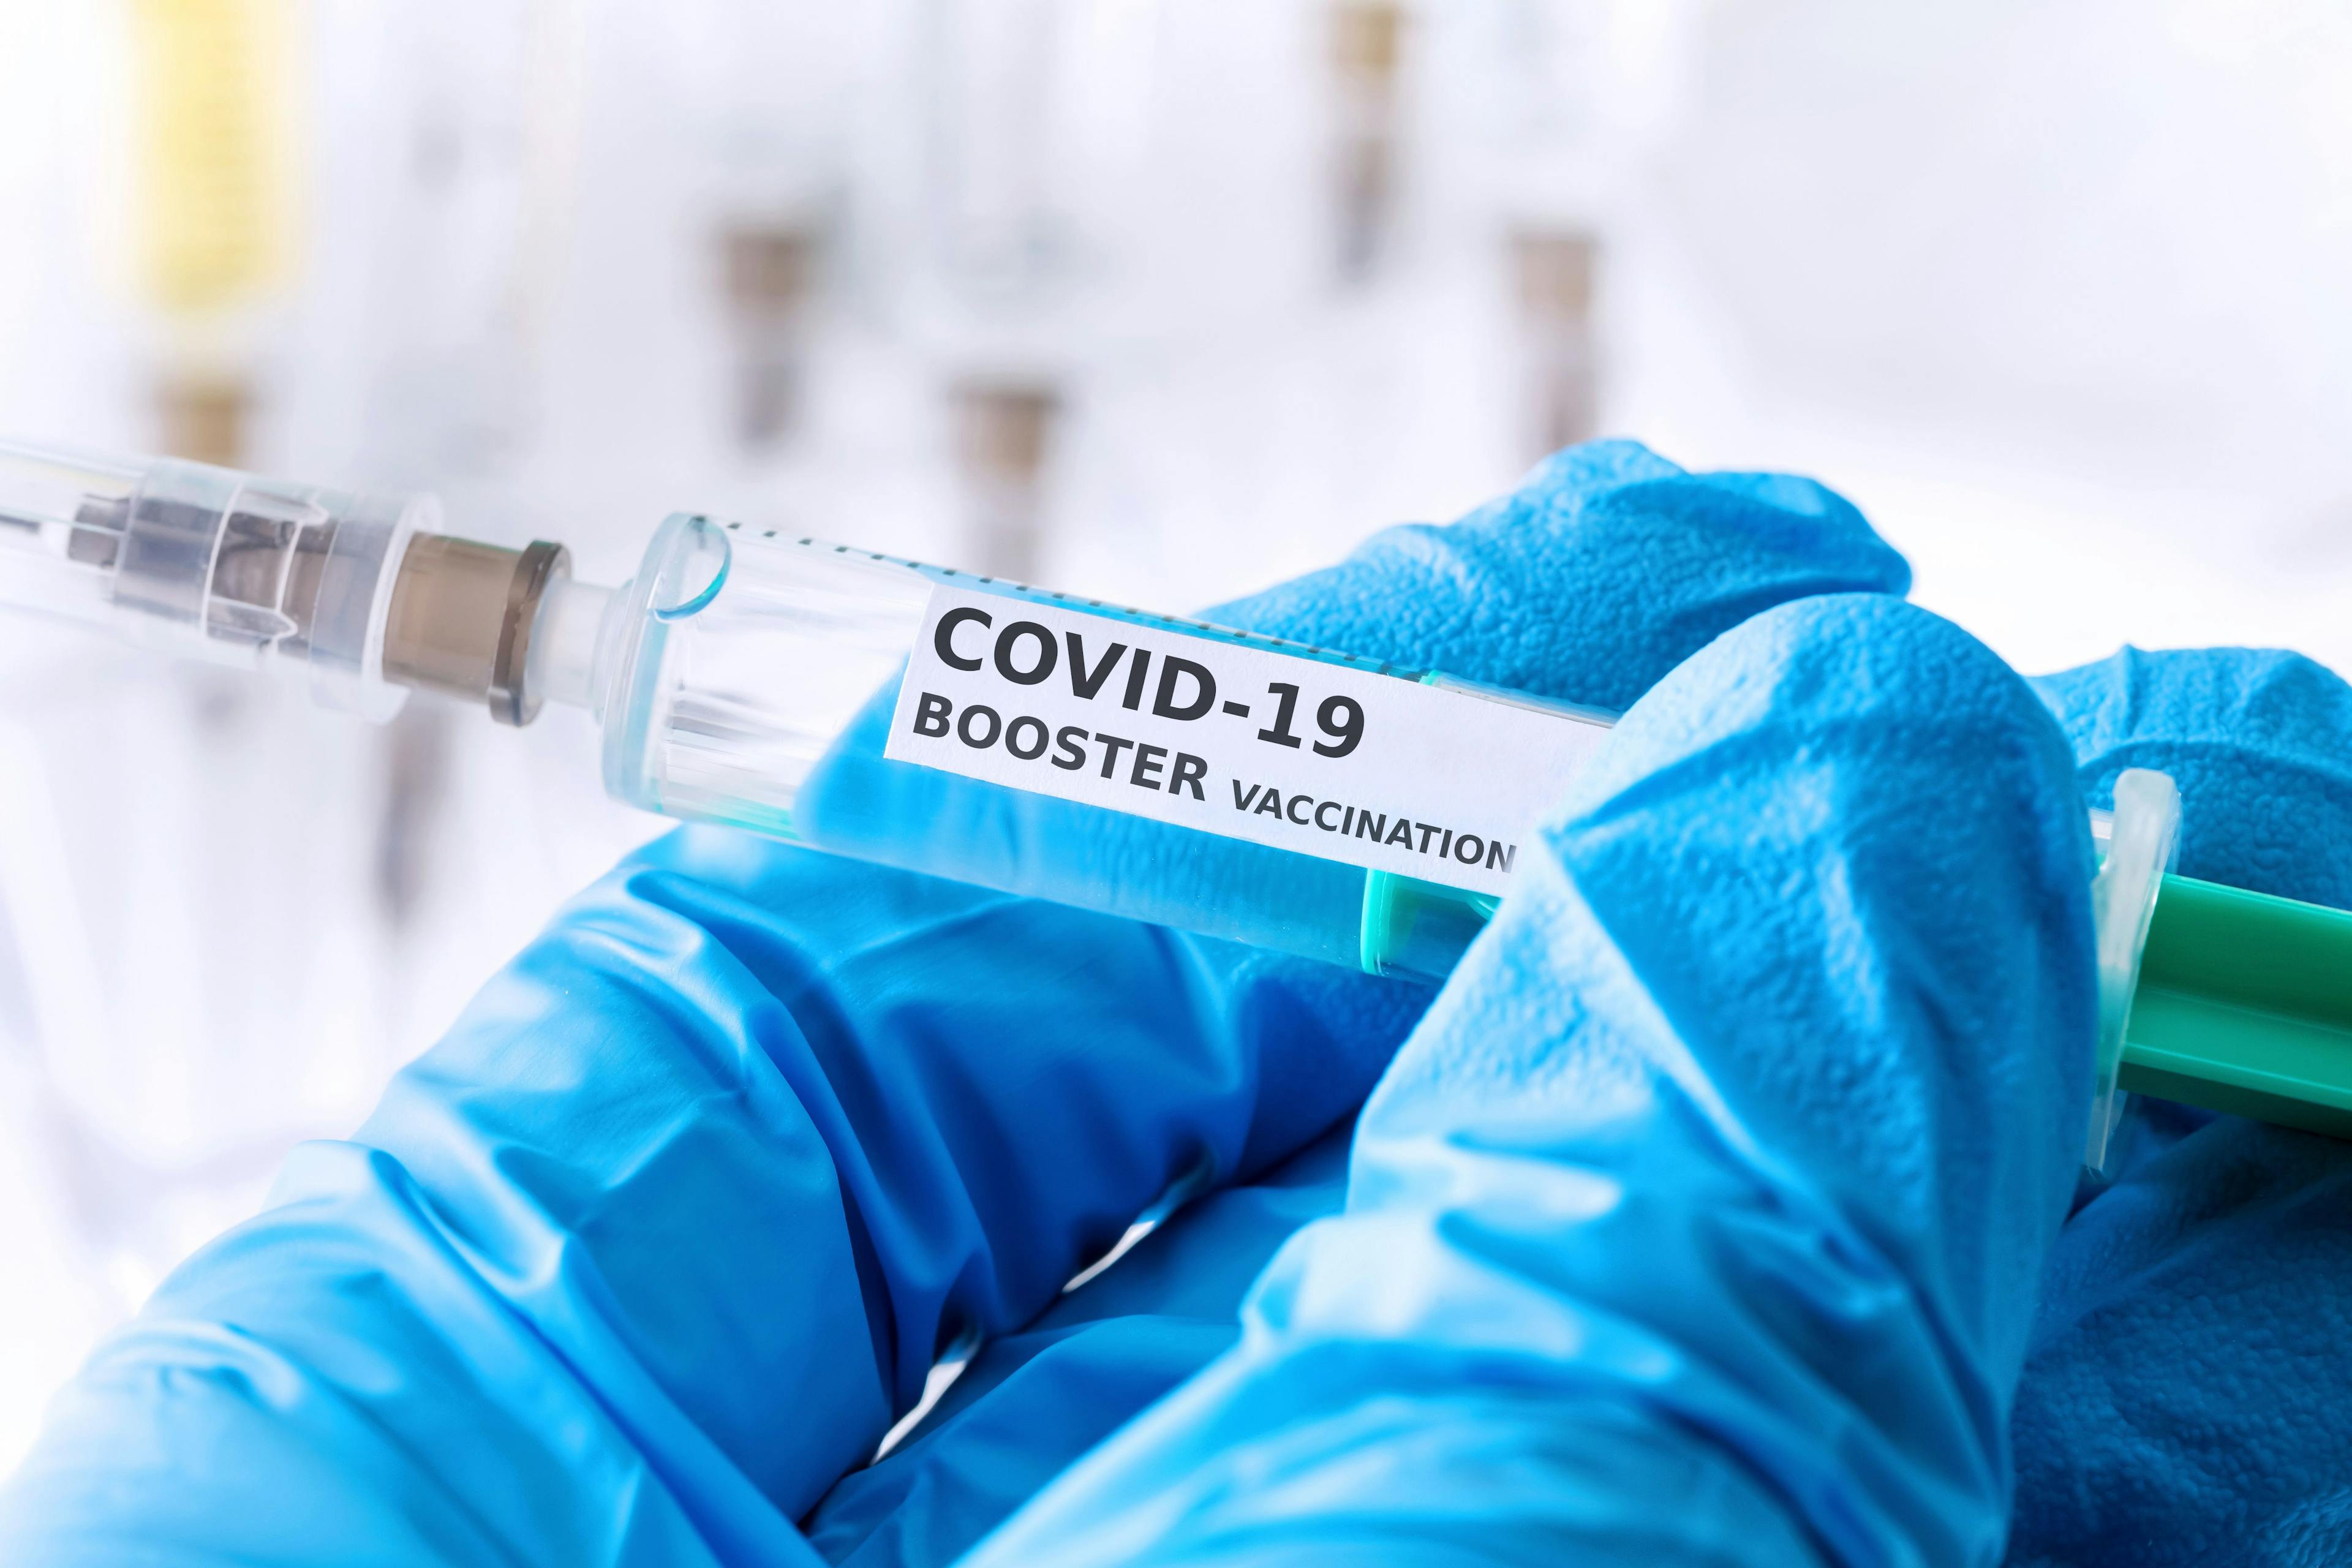 Booster Dose of COVID-19 Vaccine Reduces Infection in Health Care Workers in Israel